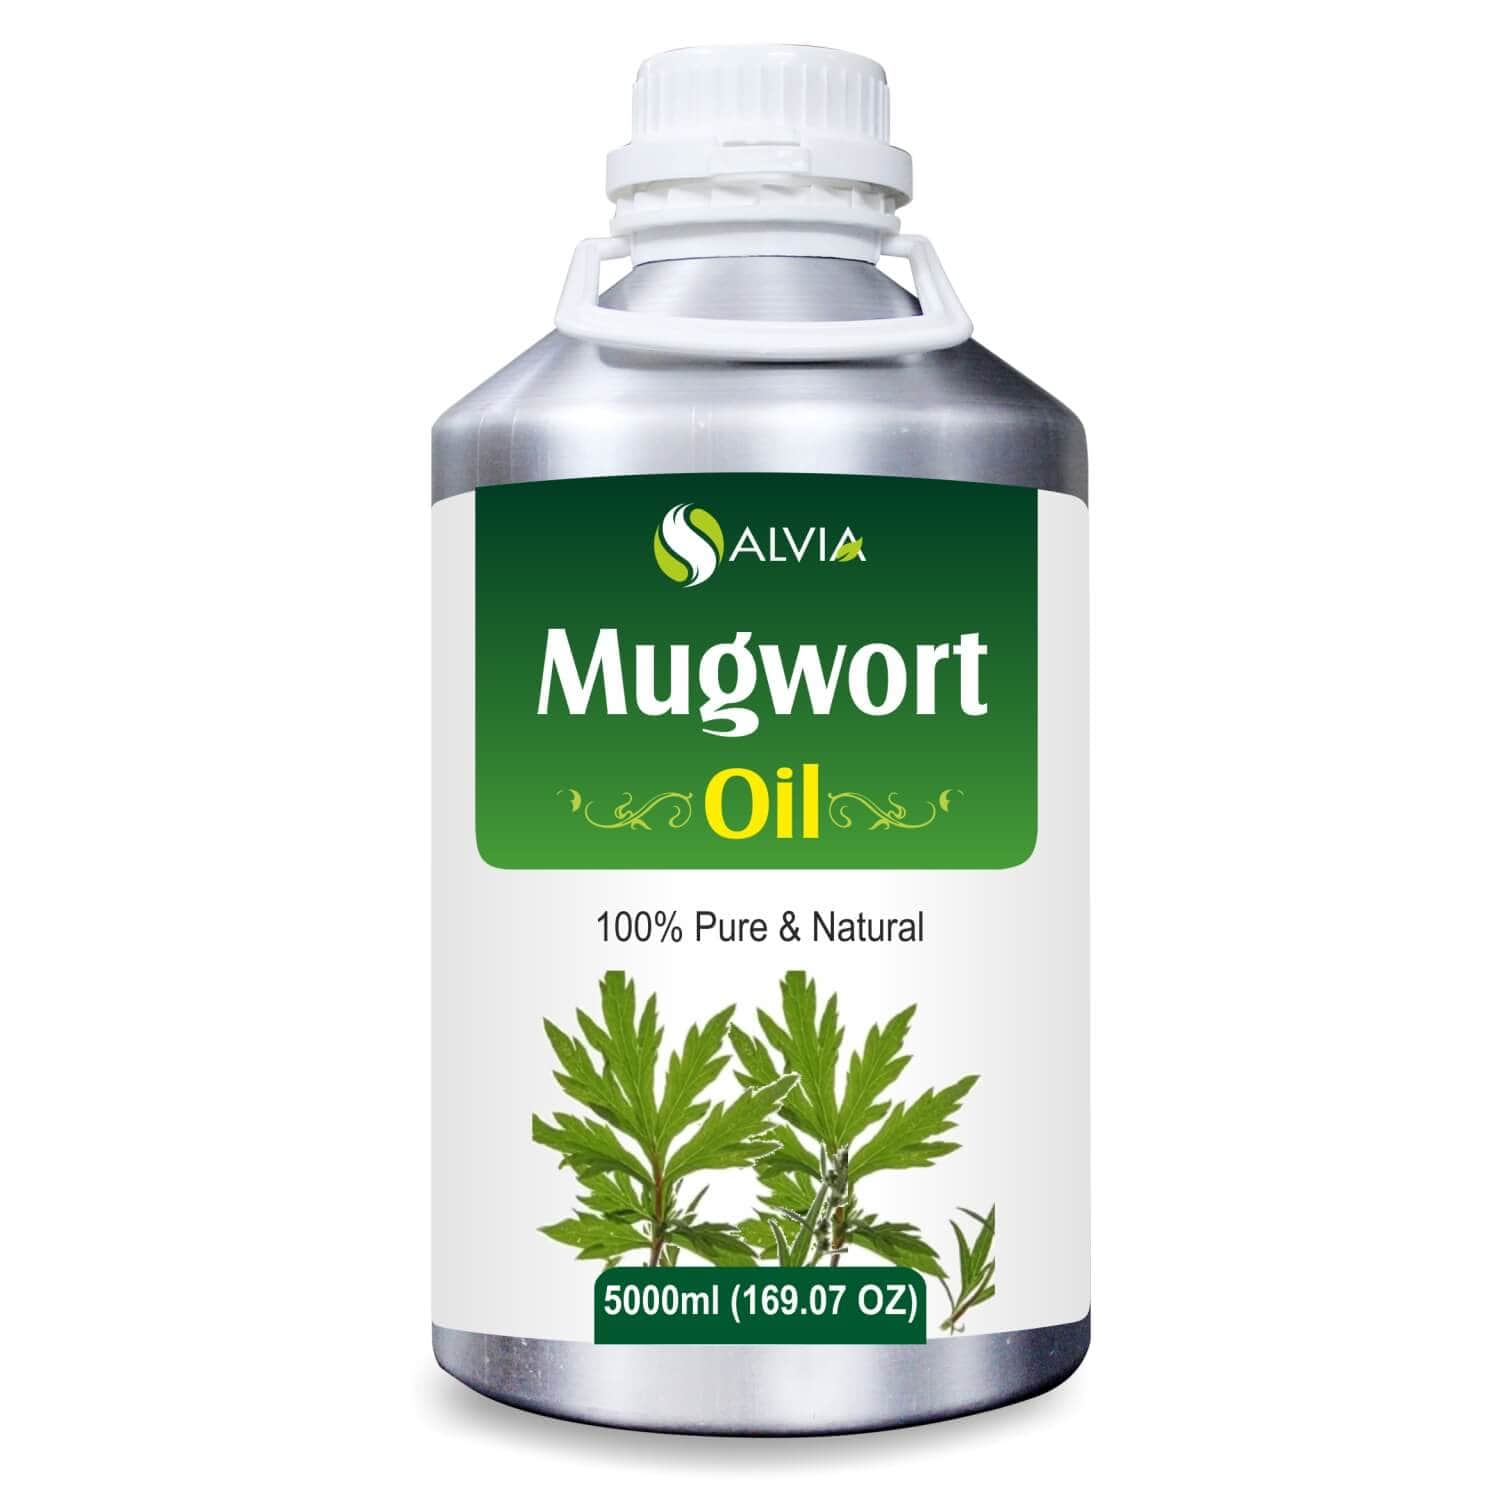 Salvia Natural Essential Oils 5000ml Mugwort Oil (Artemisia-Vulgaris) 100% Natural Pure Essential Oil Protects, Nourishes & Hydrates The Skin, Anti-Aging Properties, Removes Excessive Oil in Scalp